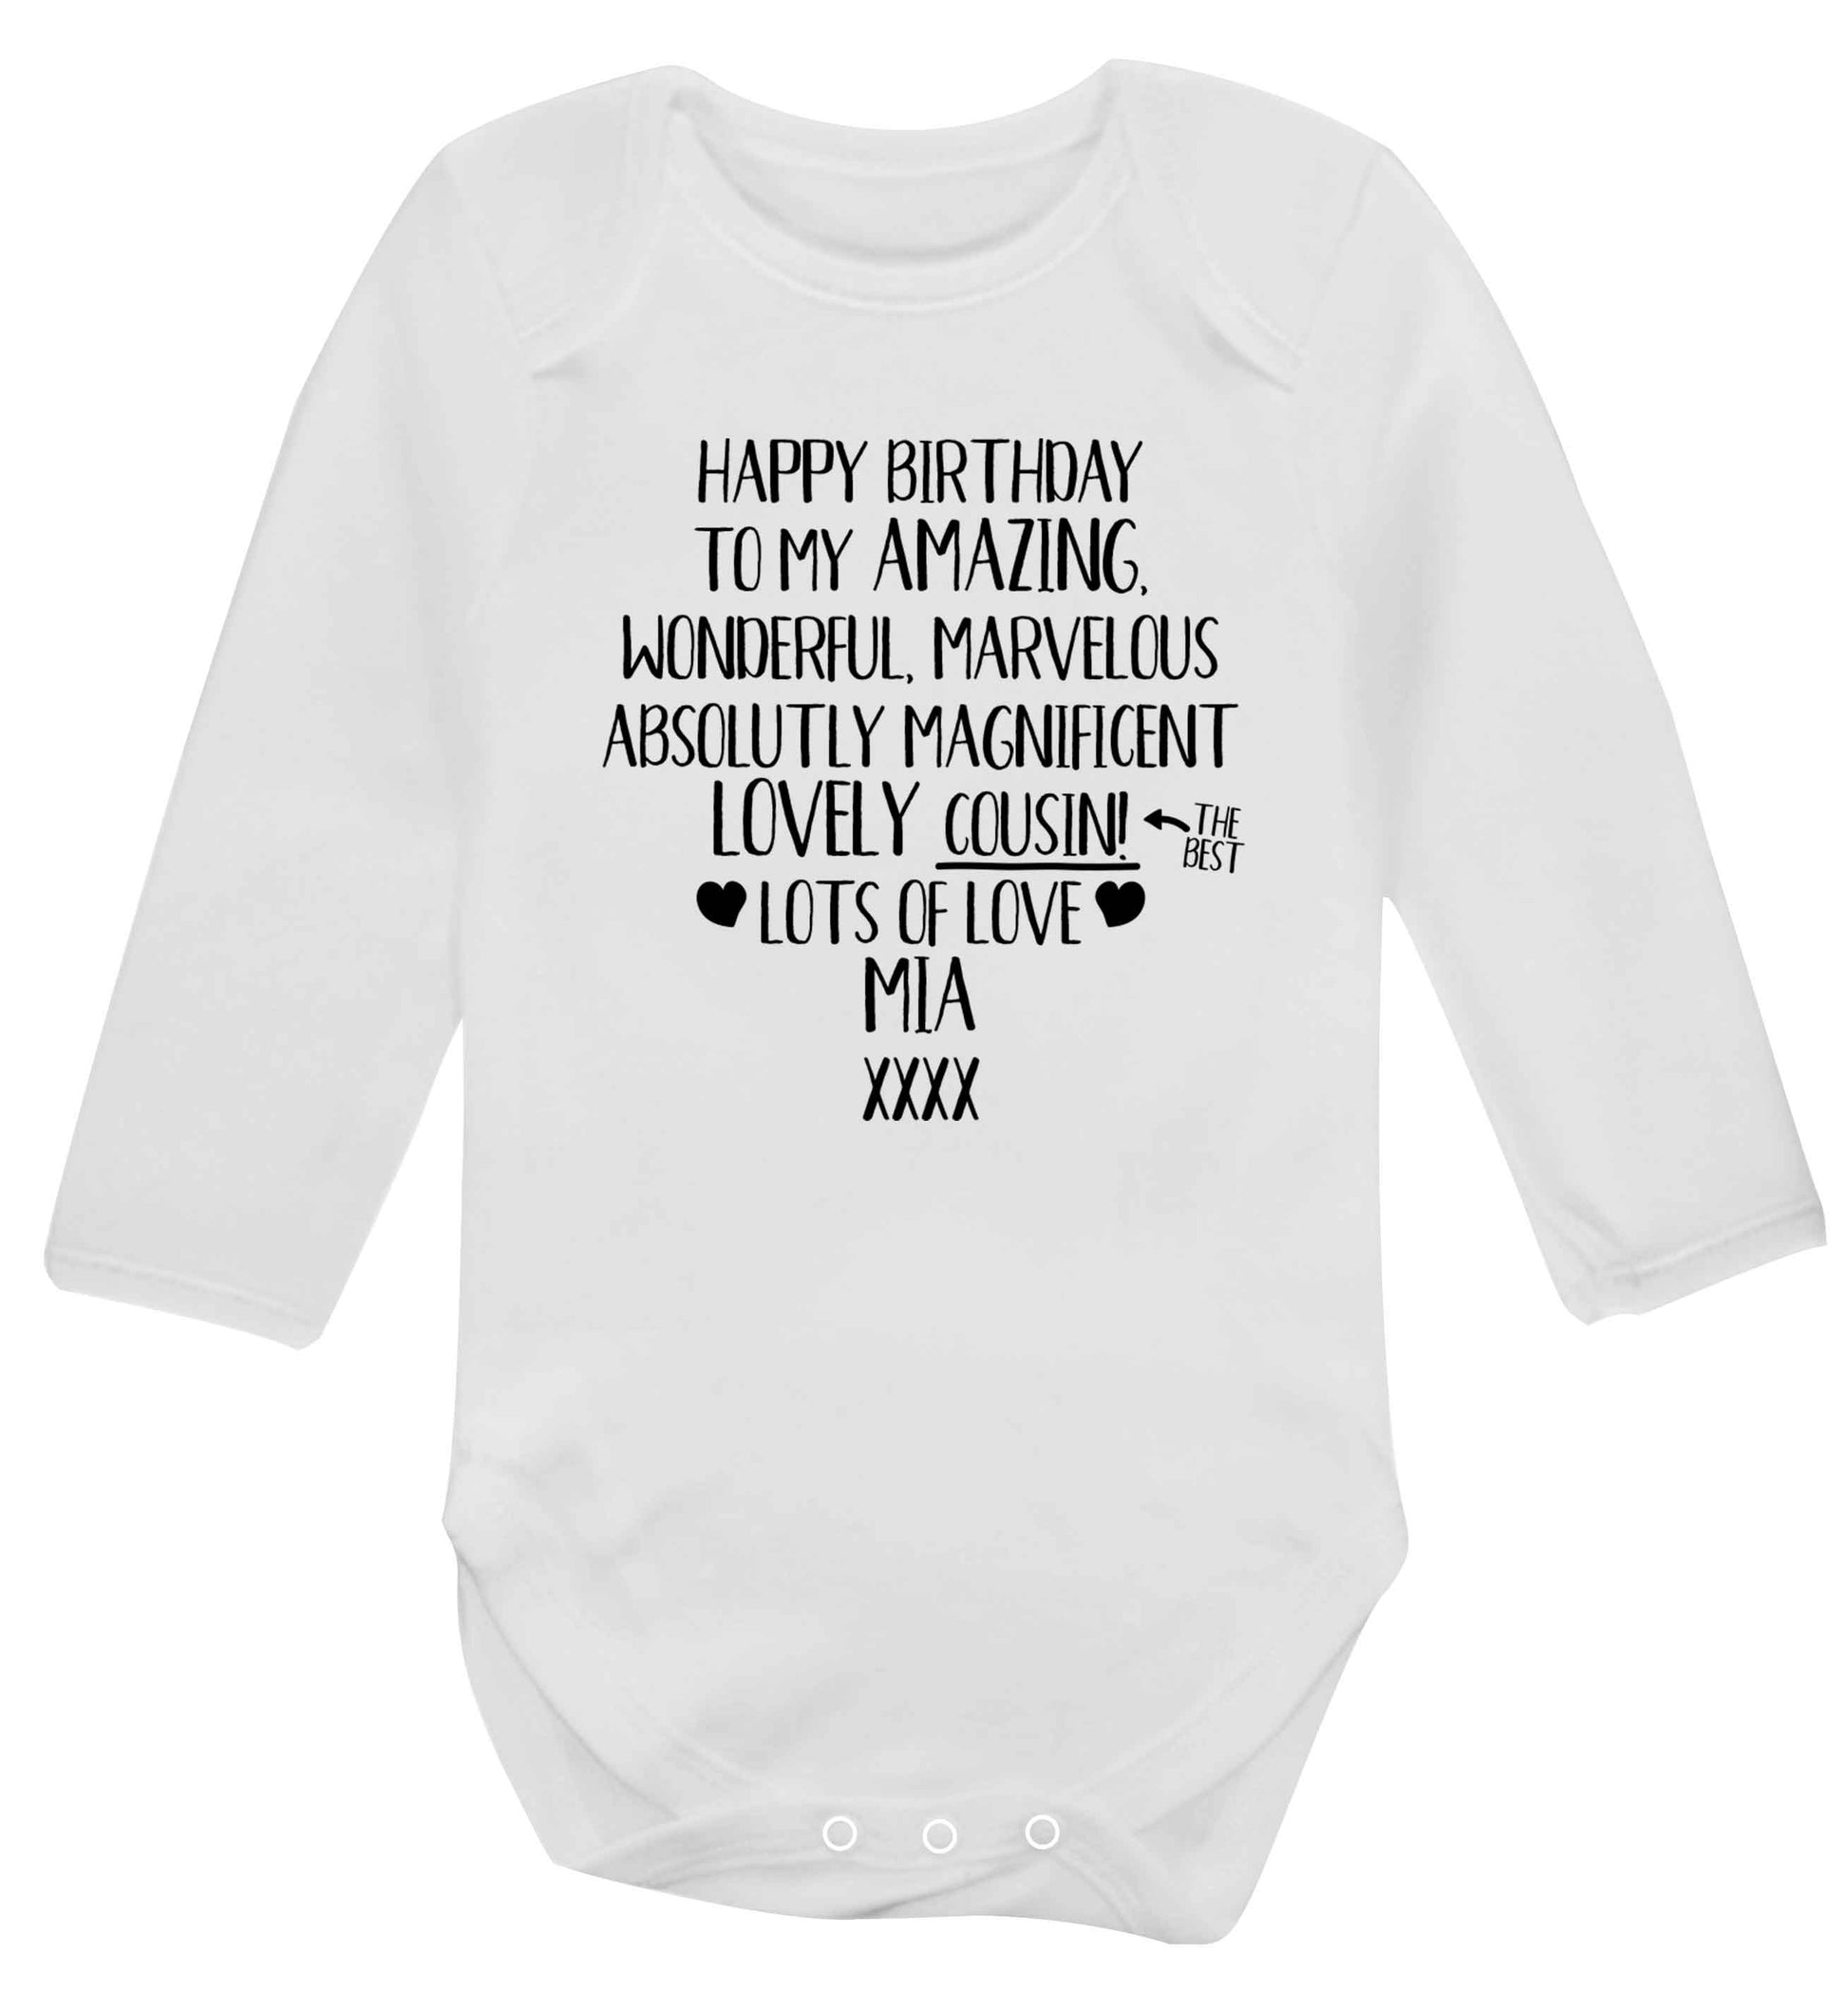 Personalised happy birthday to my amazing, wonderful, lovely cousin Baby Vest long sleeved white 6-12 months